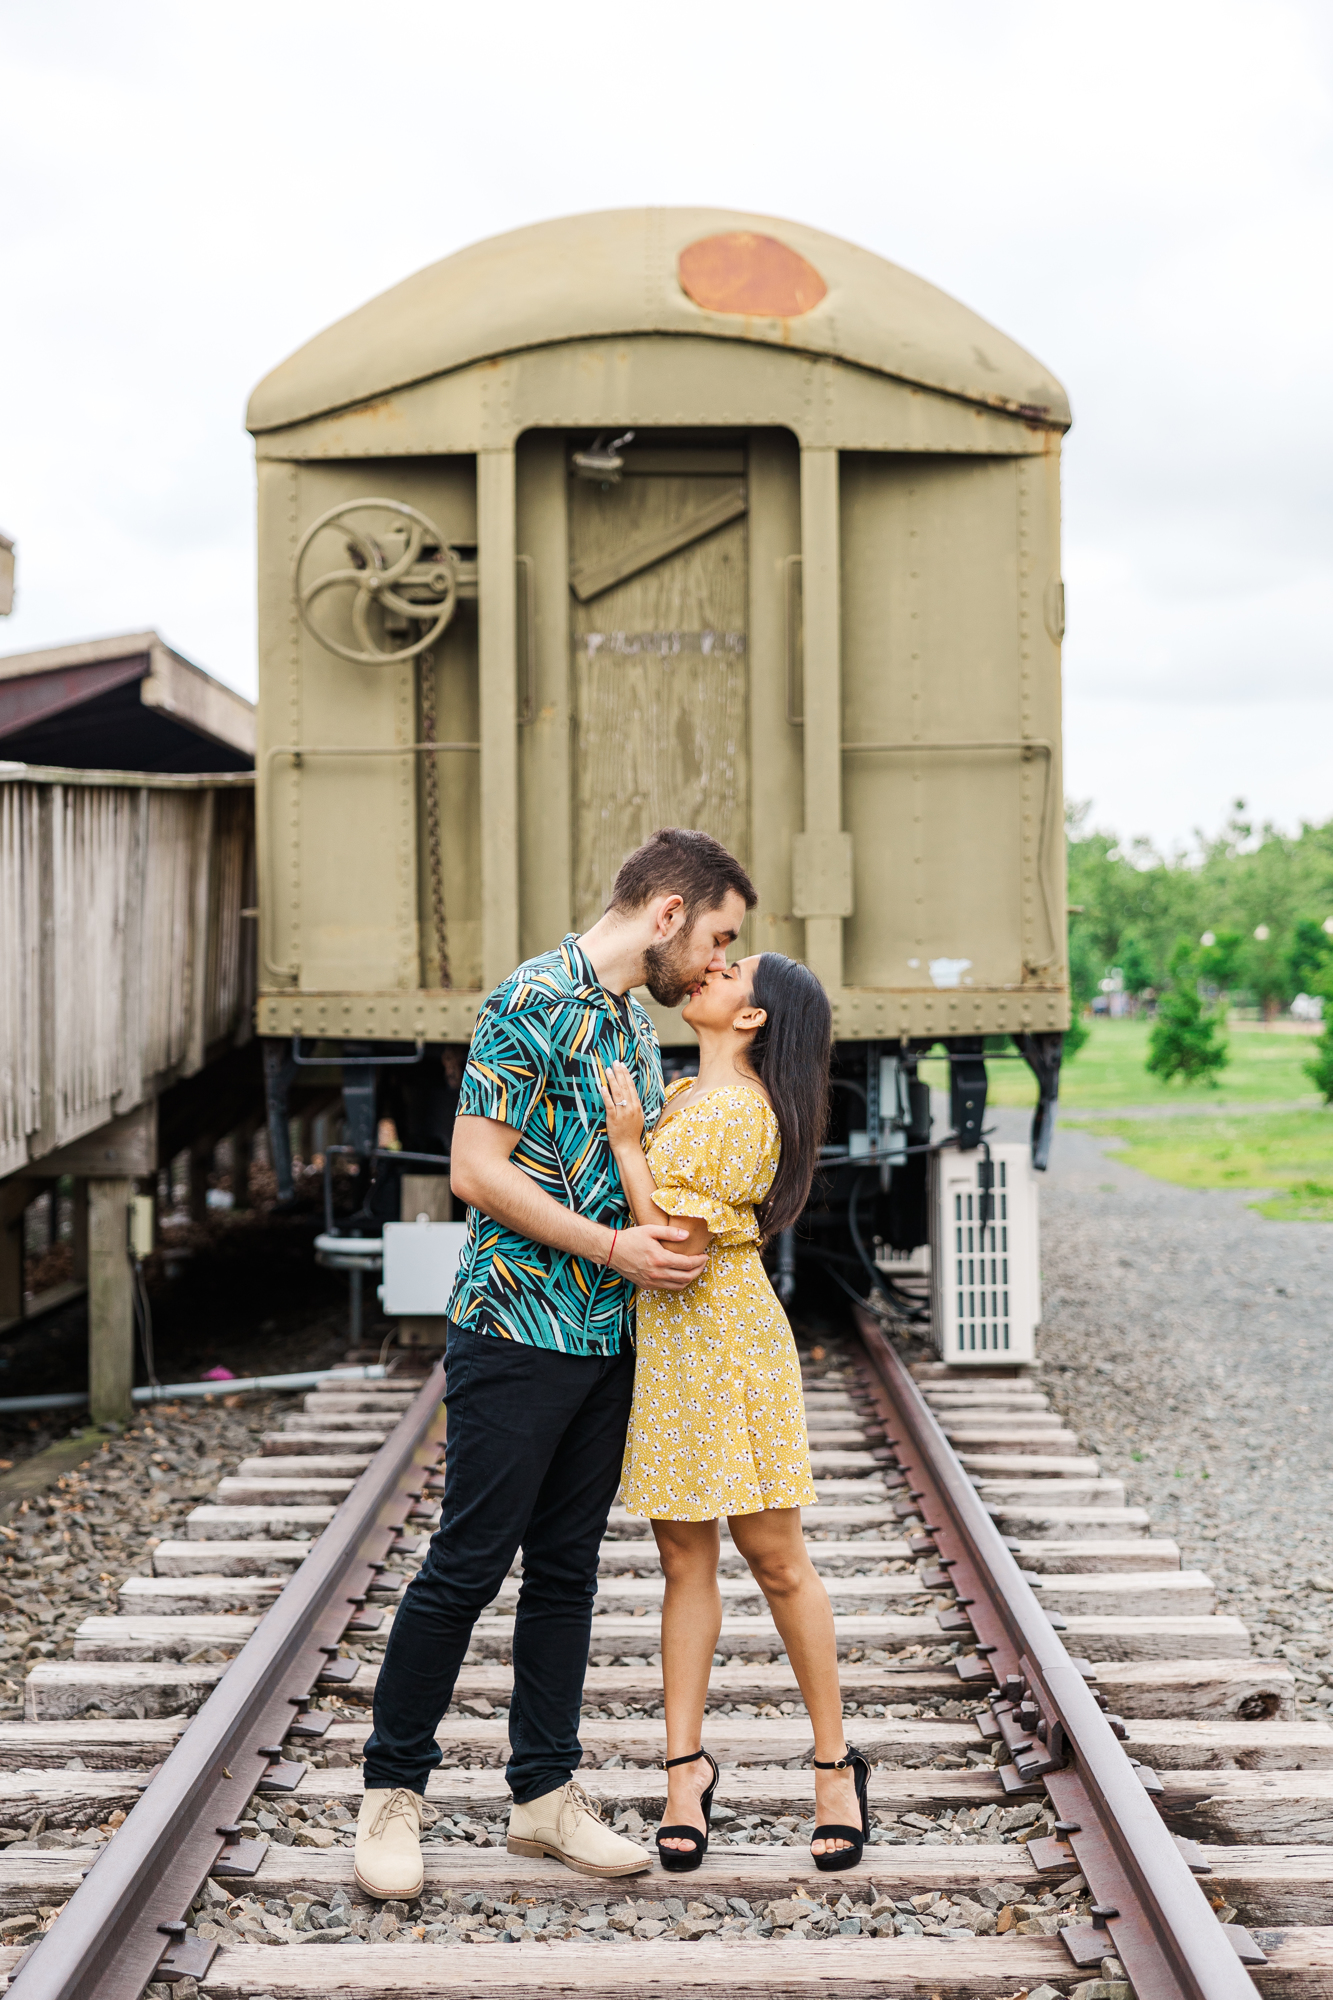 Charming Overcast Liberty State Park Engagement Photography